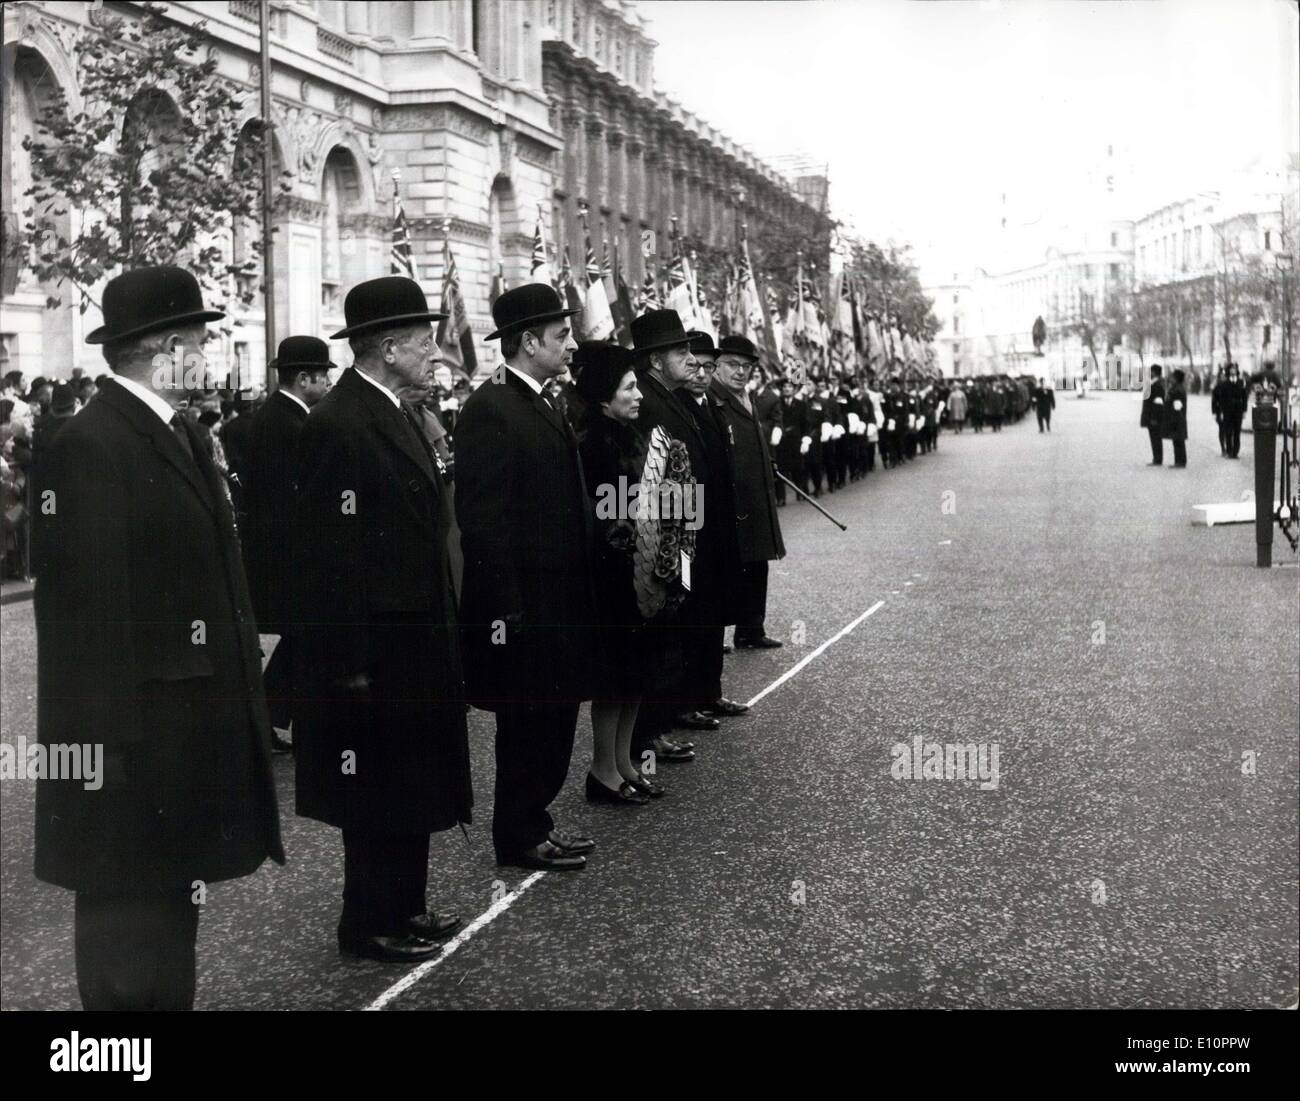 Nov. 19, 1973 - National Jewish Remembrance Service And Parade. About 6,000 Jewish Ex-Servicemen and Women took part in yesterday's National Jewish Remembrance Service and Parade at the Cenotaph. Photo Shows:- In centre of the group at the Cenotaph yesterday is Sq/Ldr. Stanley Brilliant and Captain Jessica Blooman, who jointly laid a wreath at the Cenotaph. Stock Photo